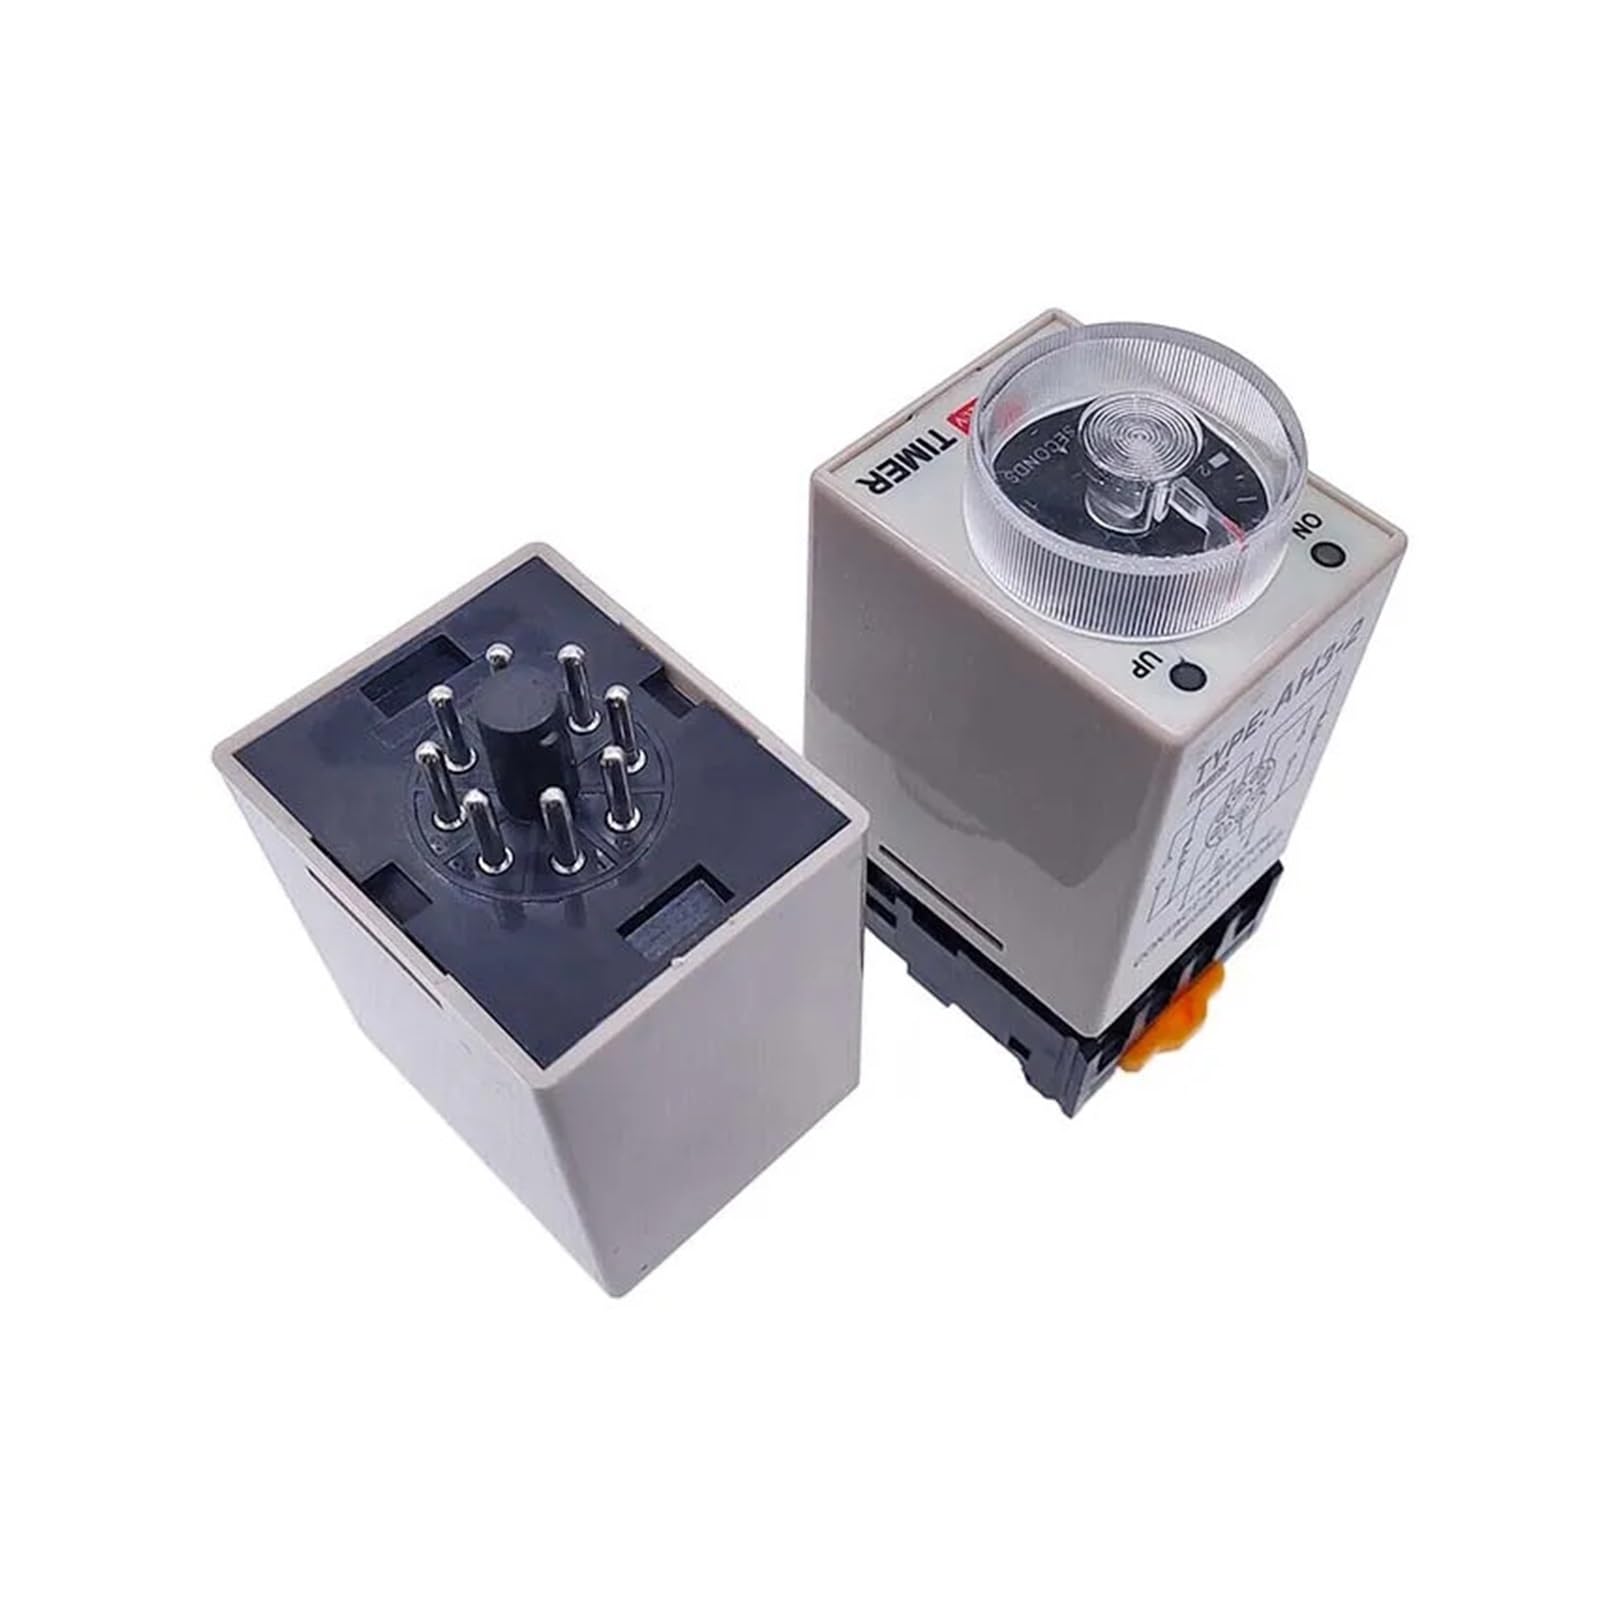 1 PC AH3-2 Power-on Delay Timer AH3-3 Time Relay AC Thick Stitch Time Set Range 1S/5S/10S/30S/60S/5M/10M/30M NWPNLXEA(AC380V,AH3-3 0-10Seconds) von NWPNLXEA